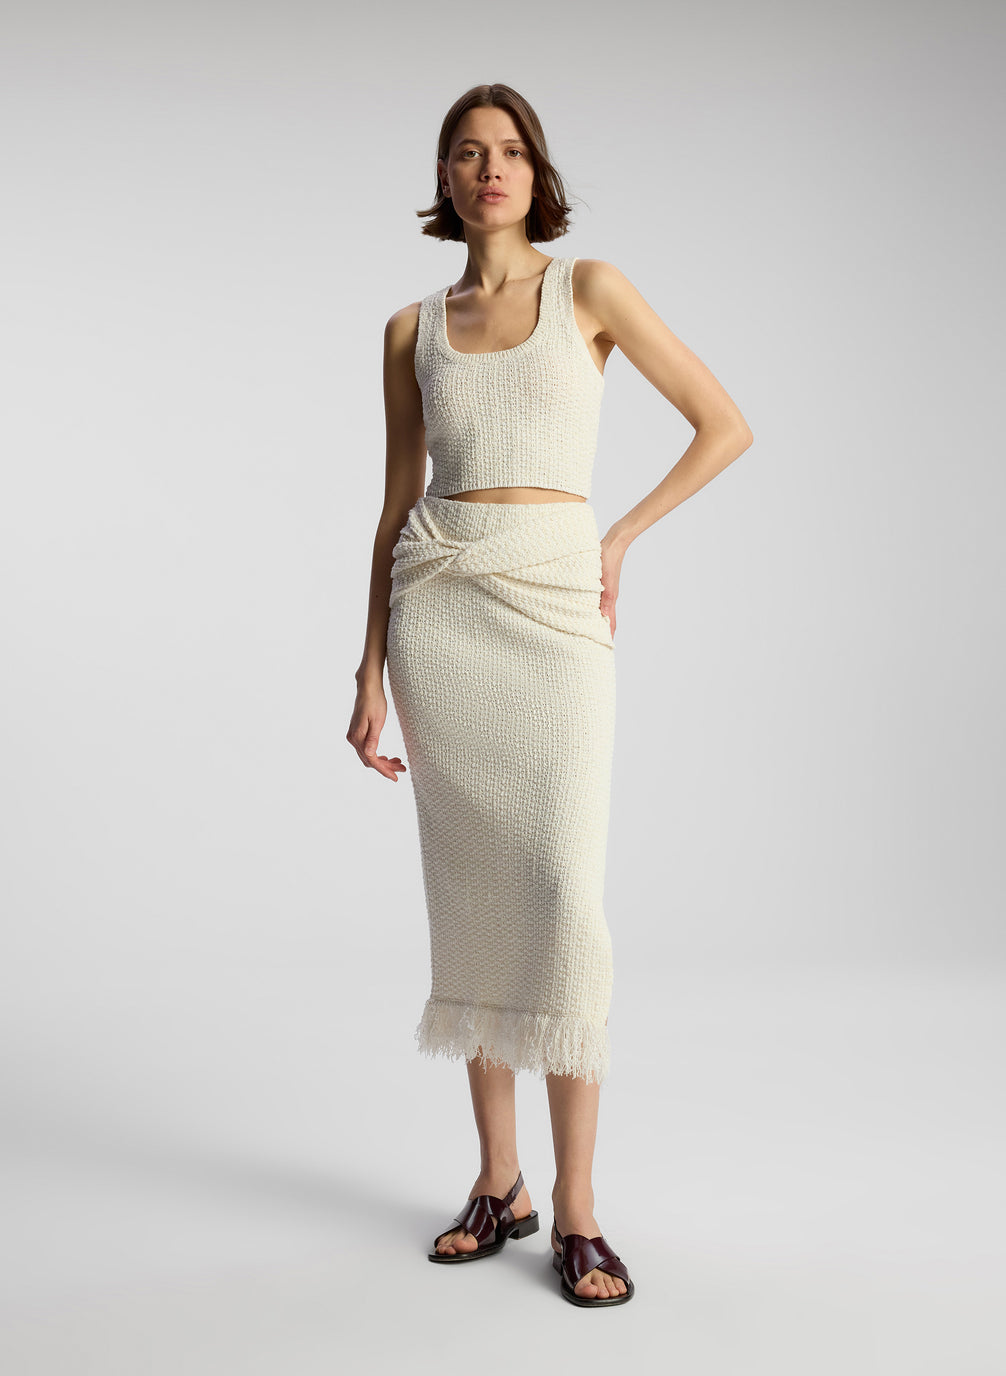 front view of woman wearing white knit sleeveless top and matching skirt